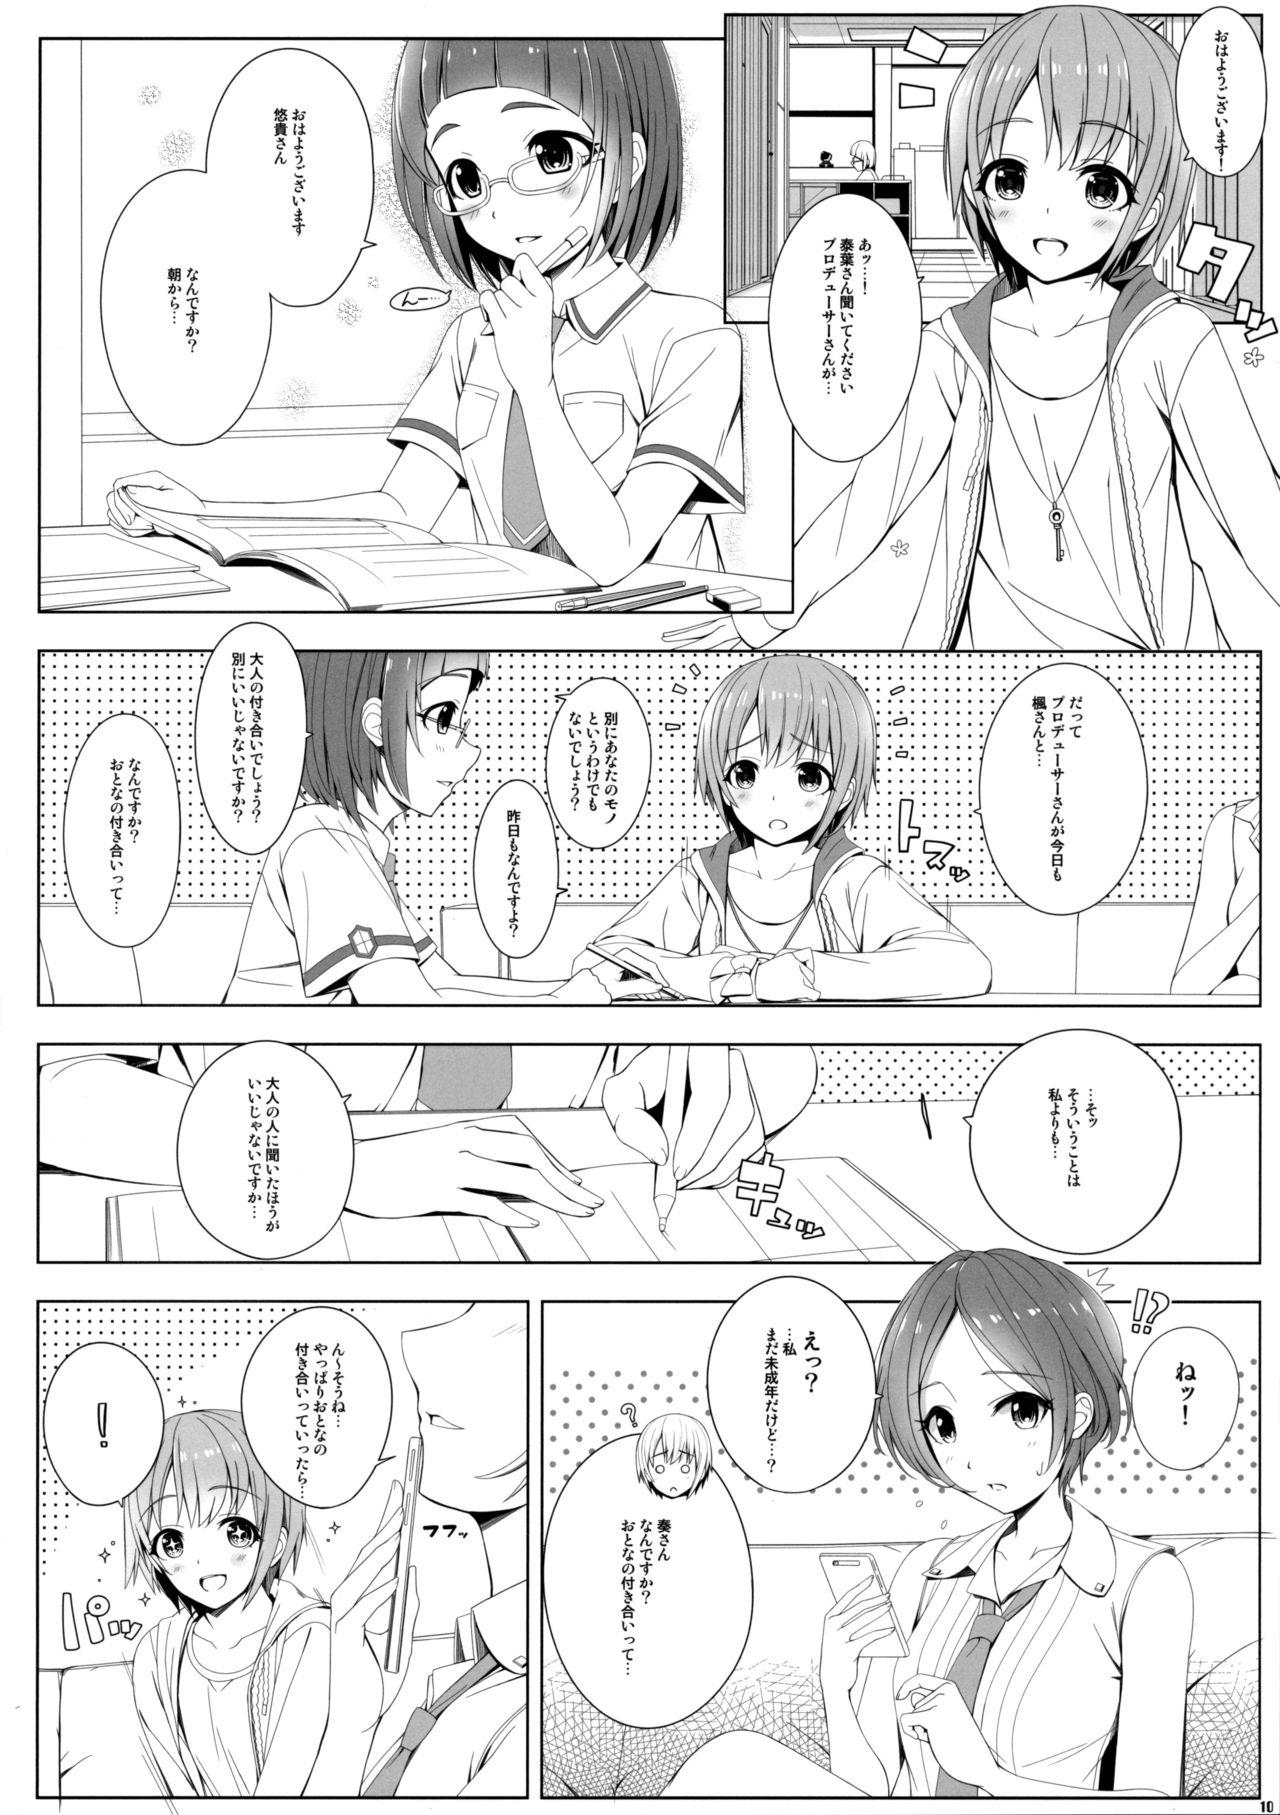 Exposed SESSION - The idolmaster Hot Naked Girl - Page 9